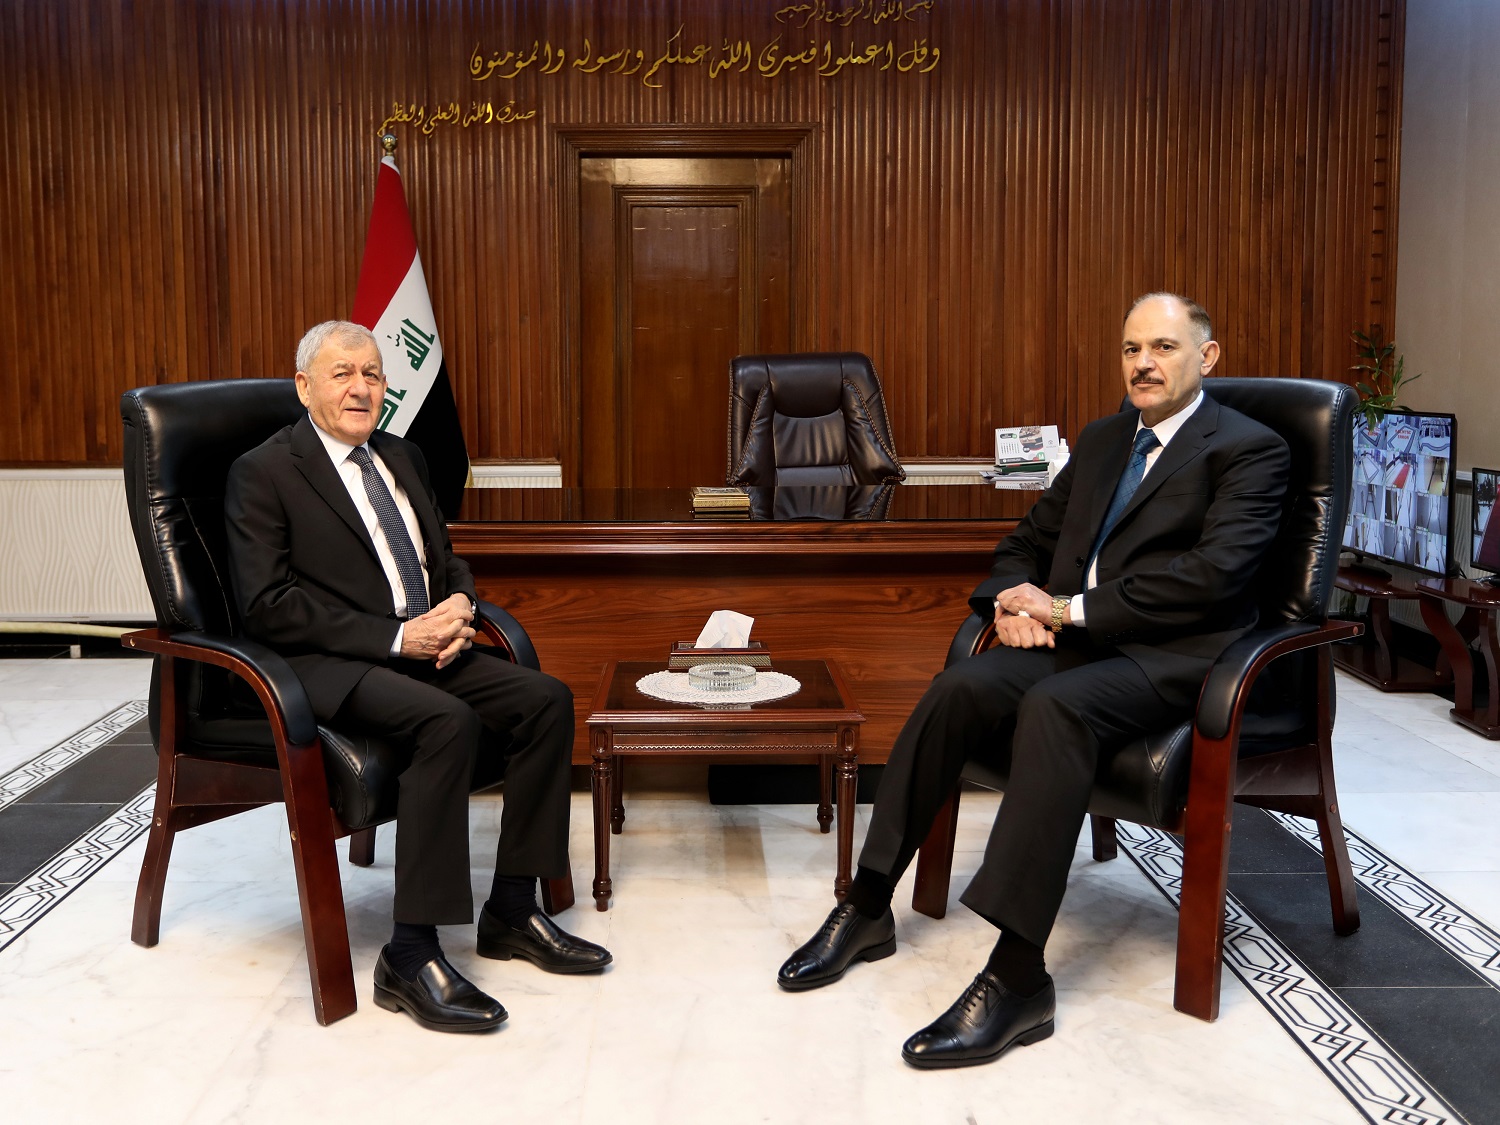 The President of the Federal Supreme Court receives the President of the Republic